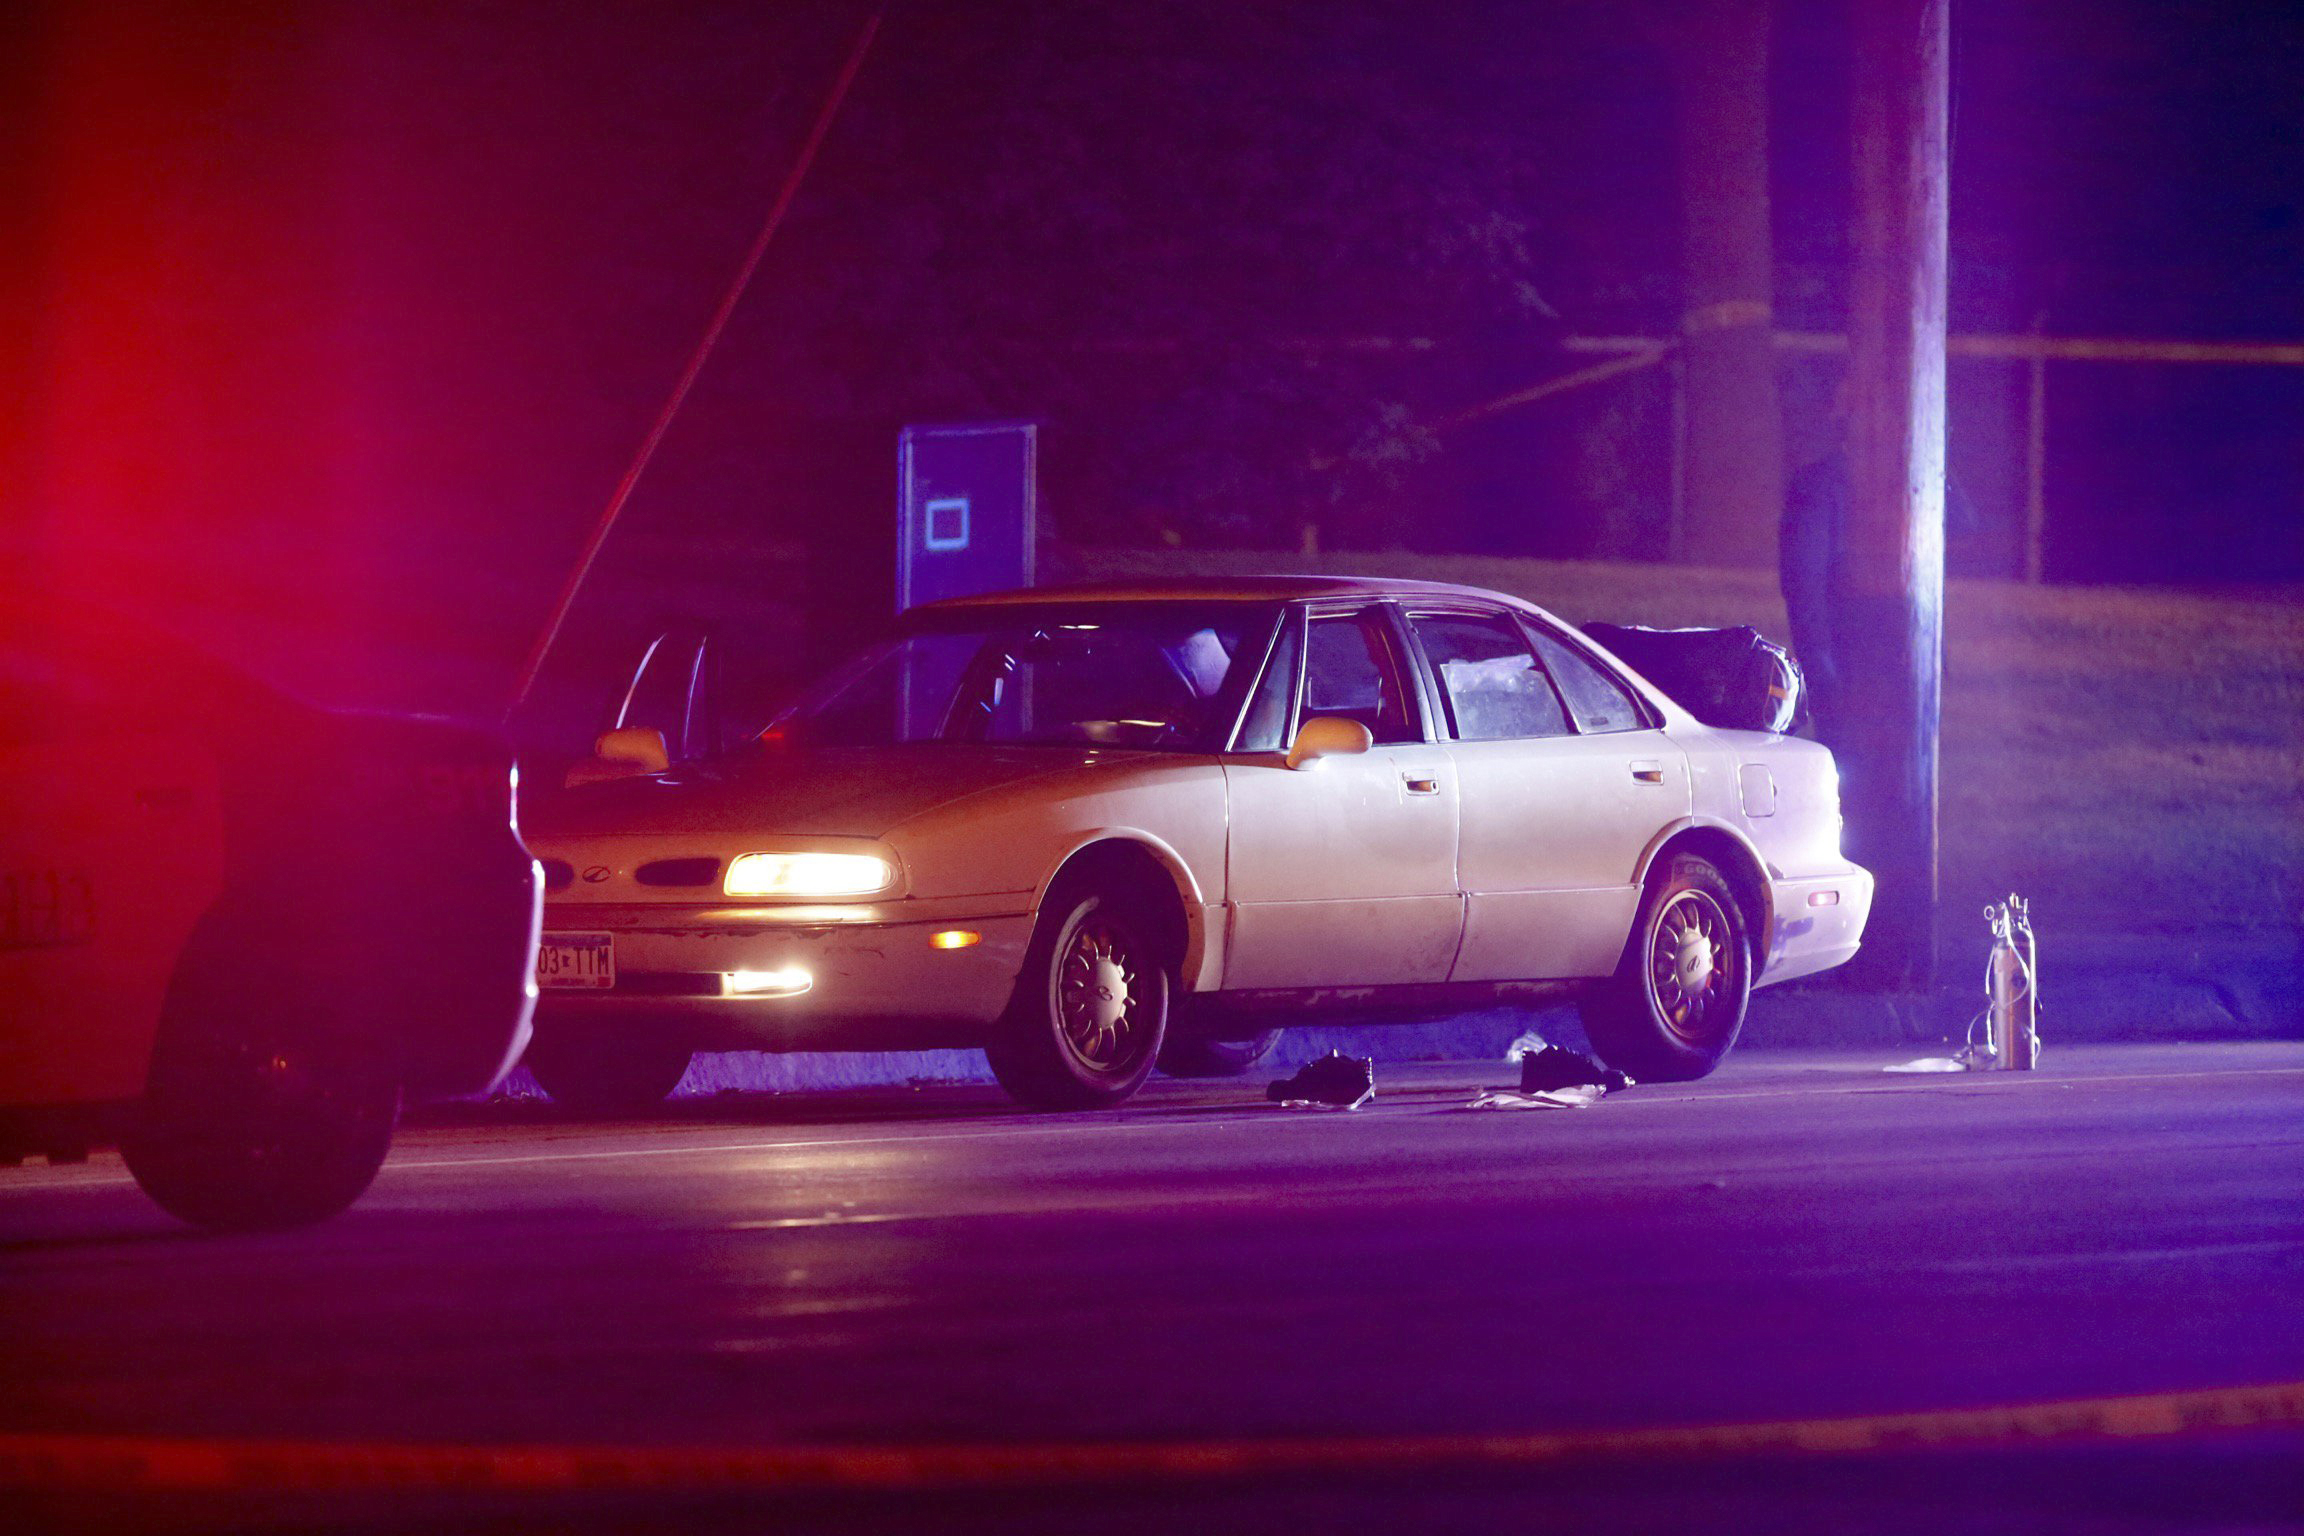 A car at the scene of a shooting of a man involving a St. Anthony Park Police officer in Falcon Heights, Minn., on July 6, 2016. (Leila Navidi—Star Tribune/AP)